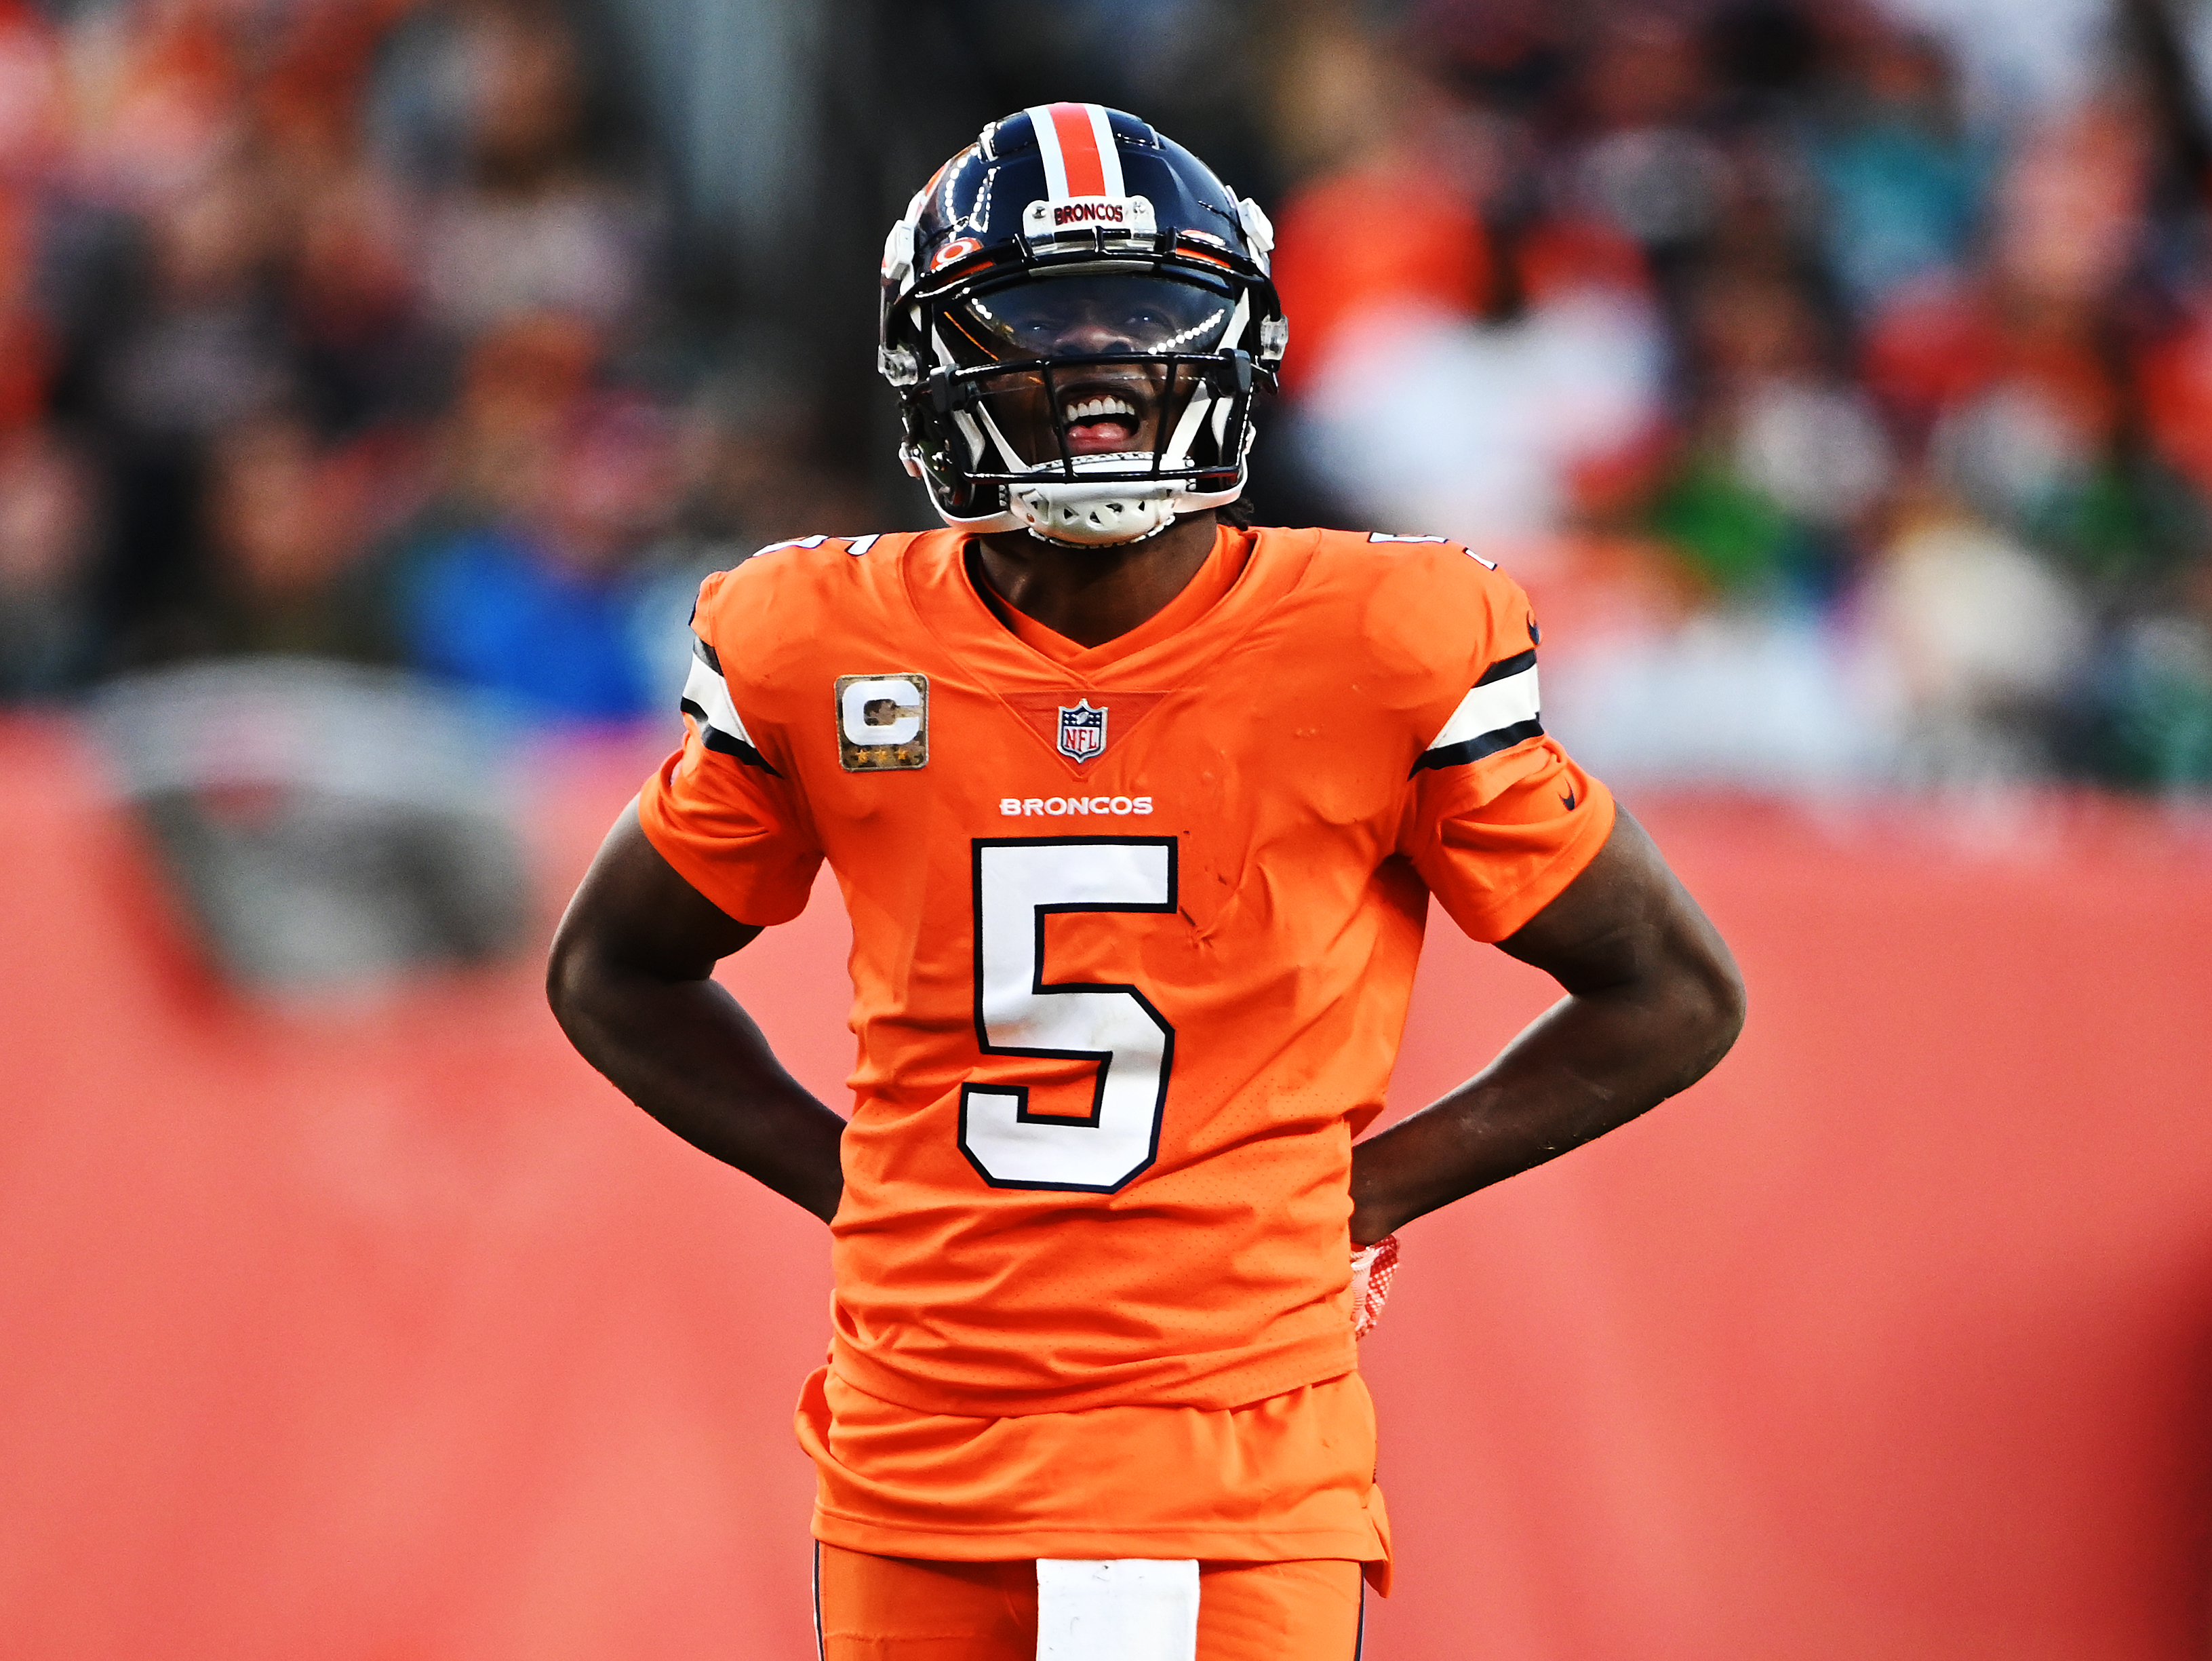 Broncos QB Teddy Bridgewater reacts during game against the Eagles